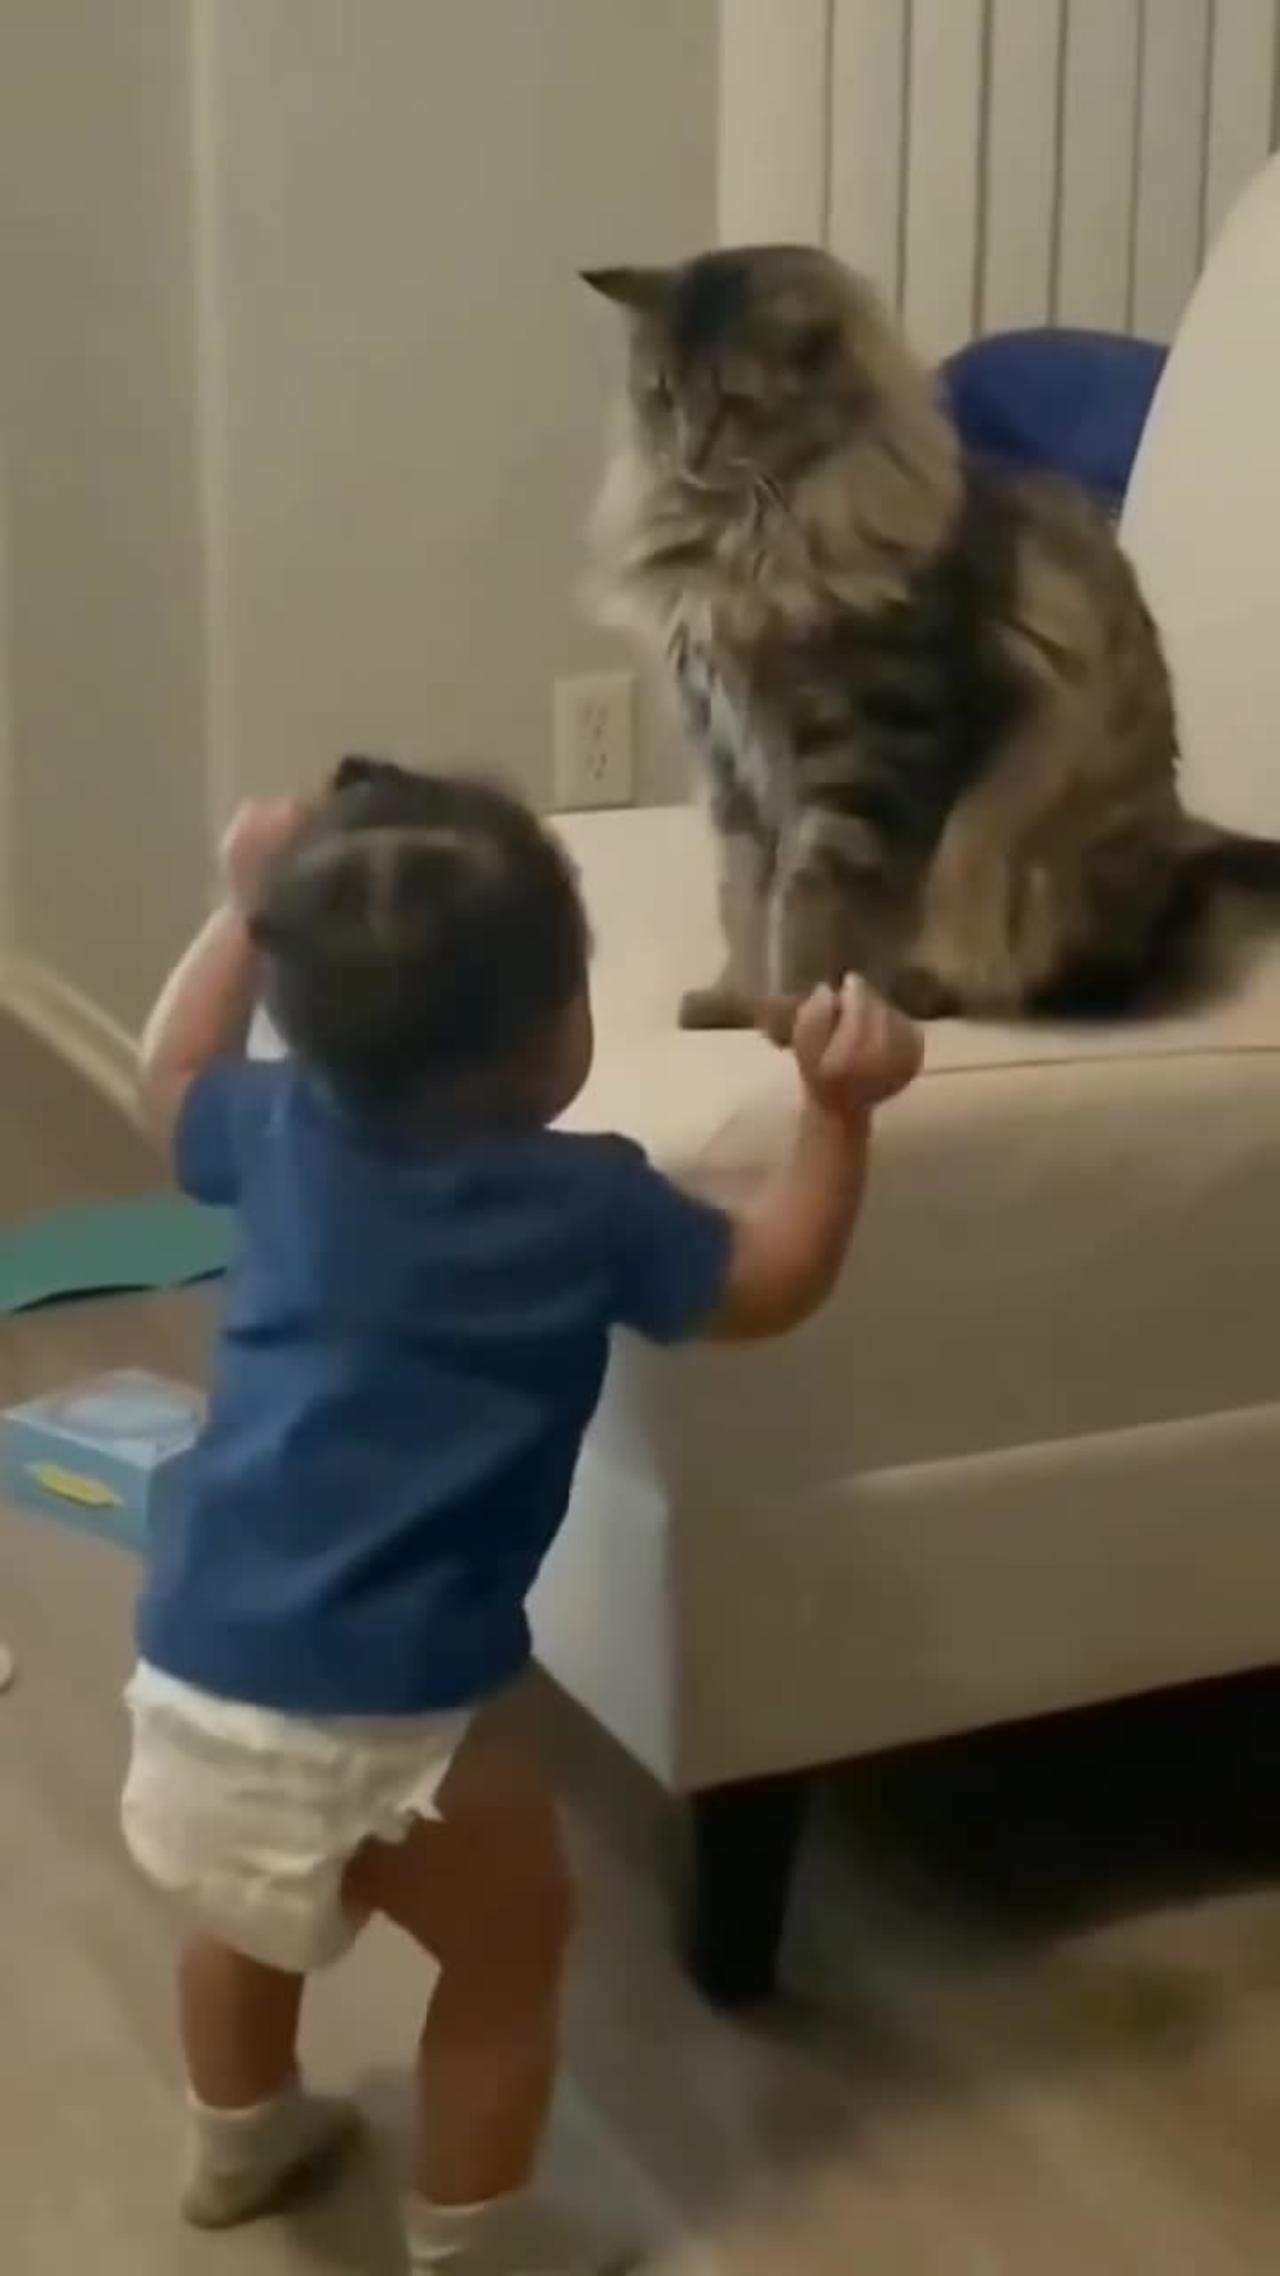 Unstoppable Laughter: Funny Cats' Antics with Little Kids!